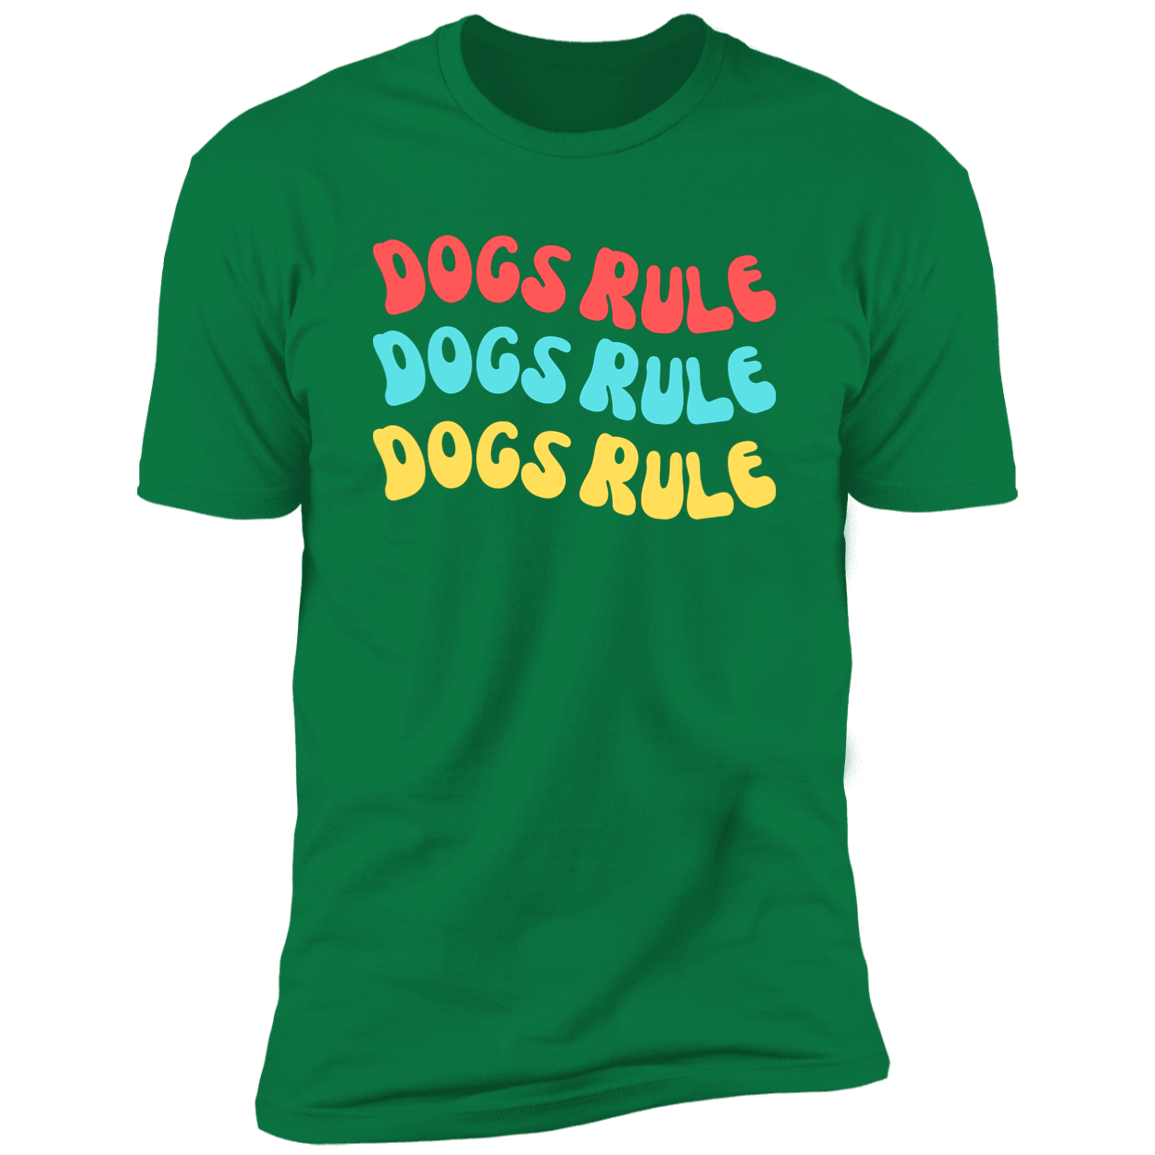 Dogs Rule Dog Shirt, dog shirt for humans, dog mom and dog dad shirt, in kelly green